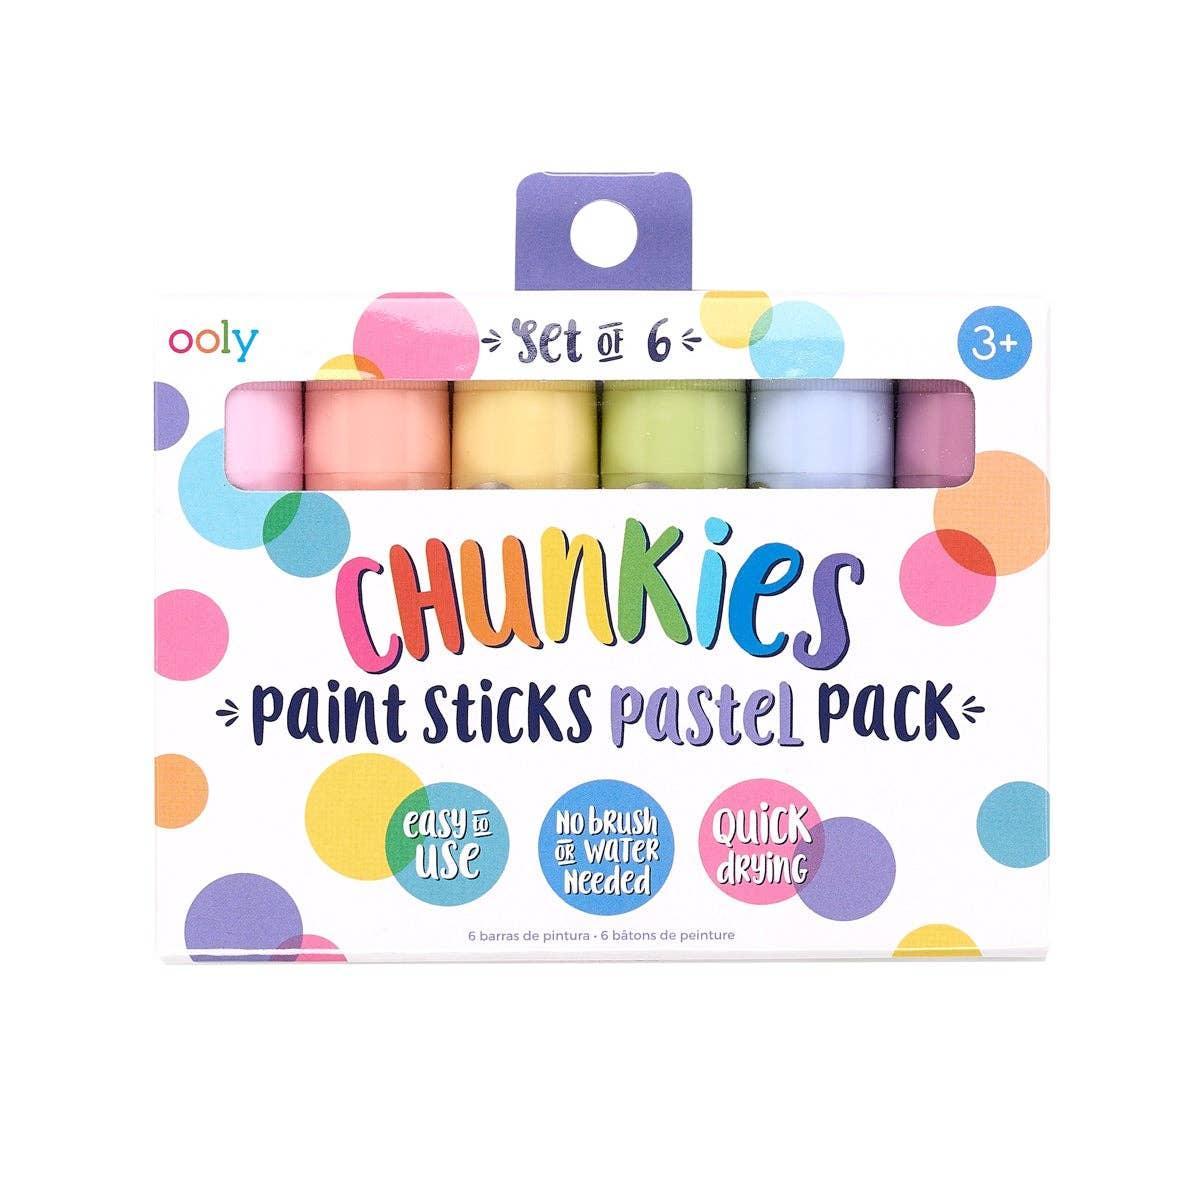 ooly Chunkies Paint Sticks: Pastel - Set of 6 - Why and Whale